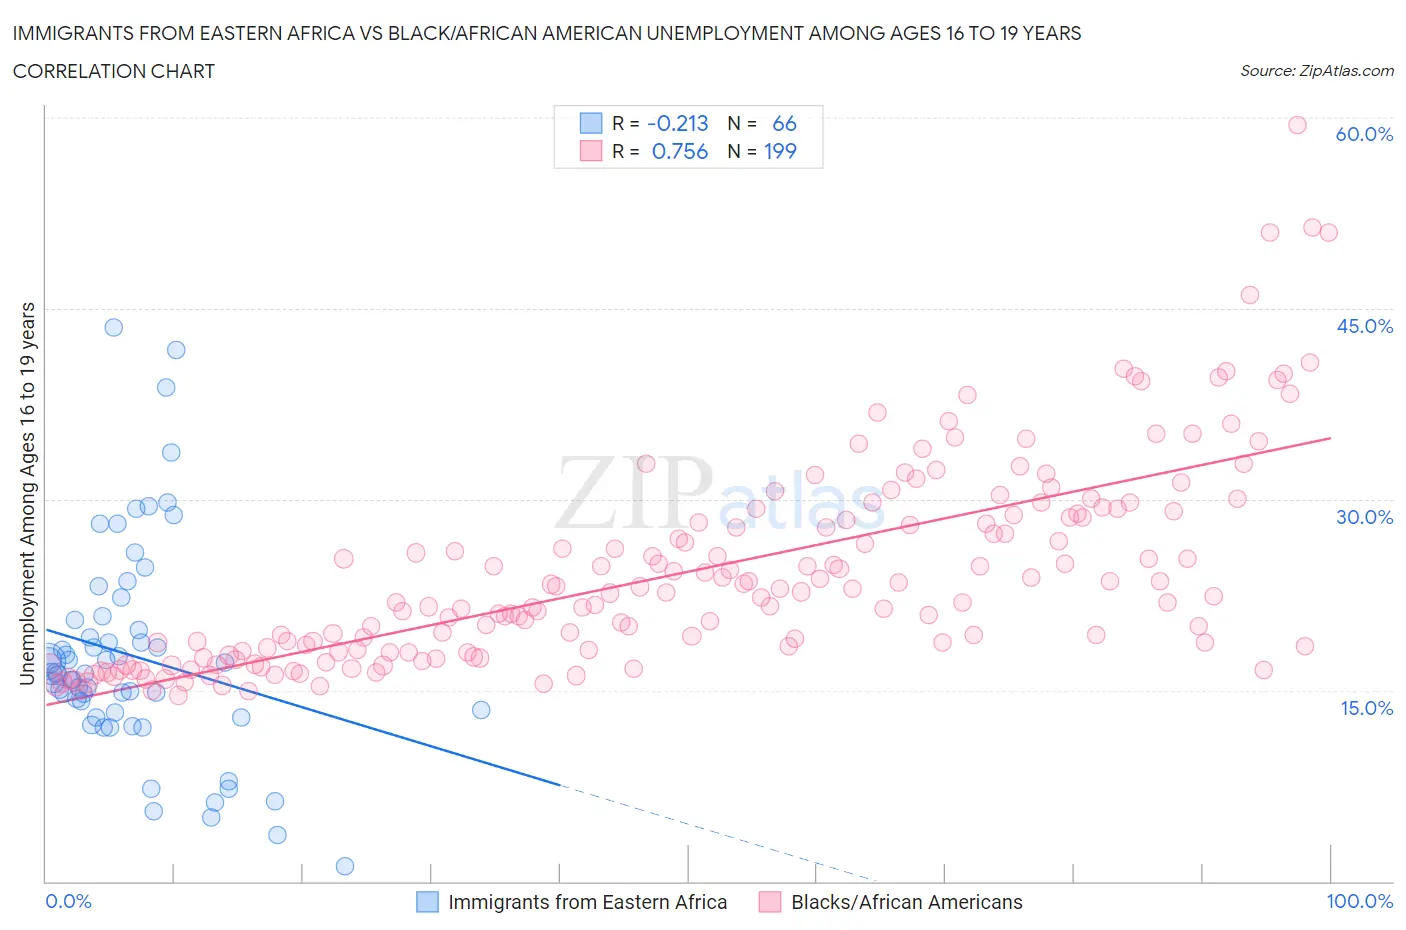 Immigrants from Eastern Africa vs Black/African American Unemployment Among Ages 16 to 19 years